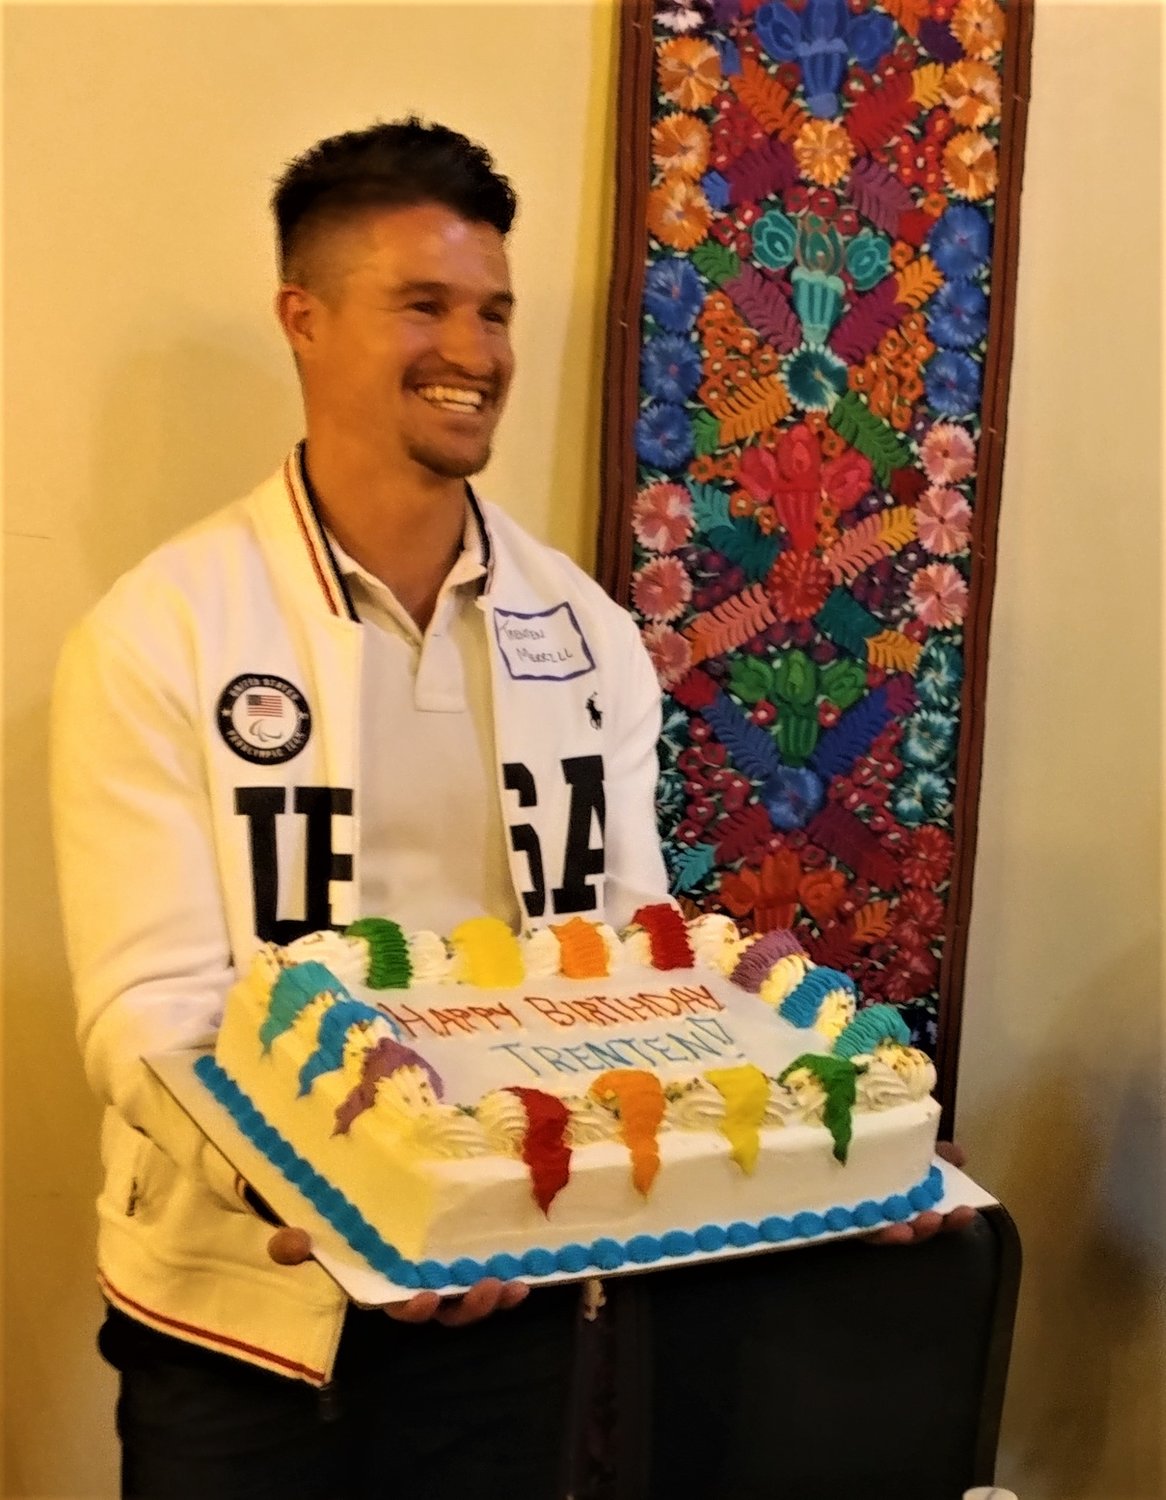 Lou and Mary Henson Community Breakfast keynote speaker Trenten Merrill celebrated his birthday in Las Cruces Wednesday, May 18, as the Boys and Girls Club of Las Cruces hosted a reception at La Posta de Mesilla.